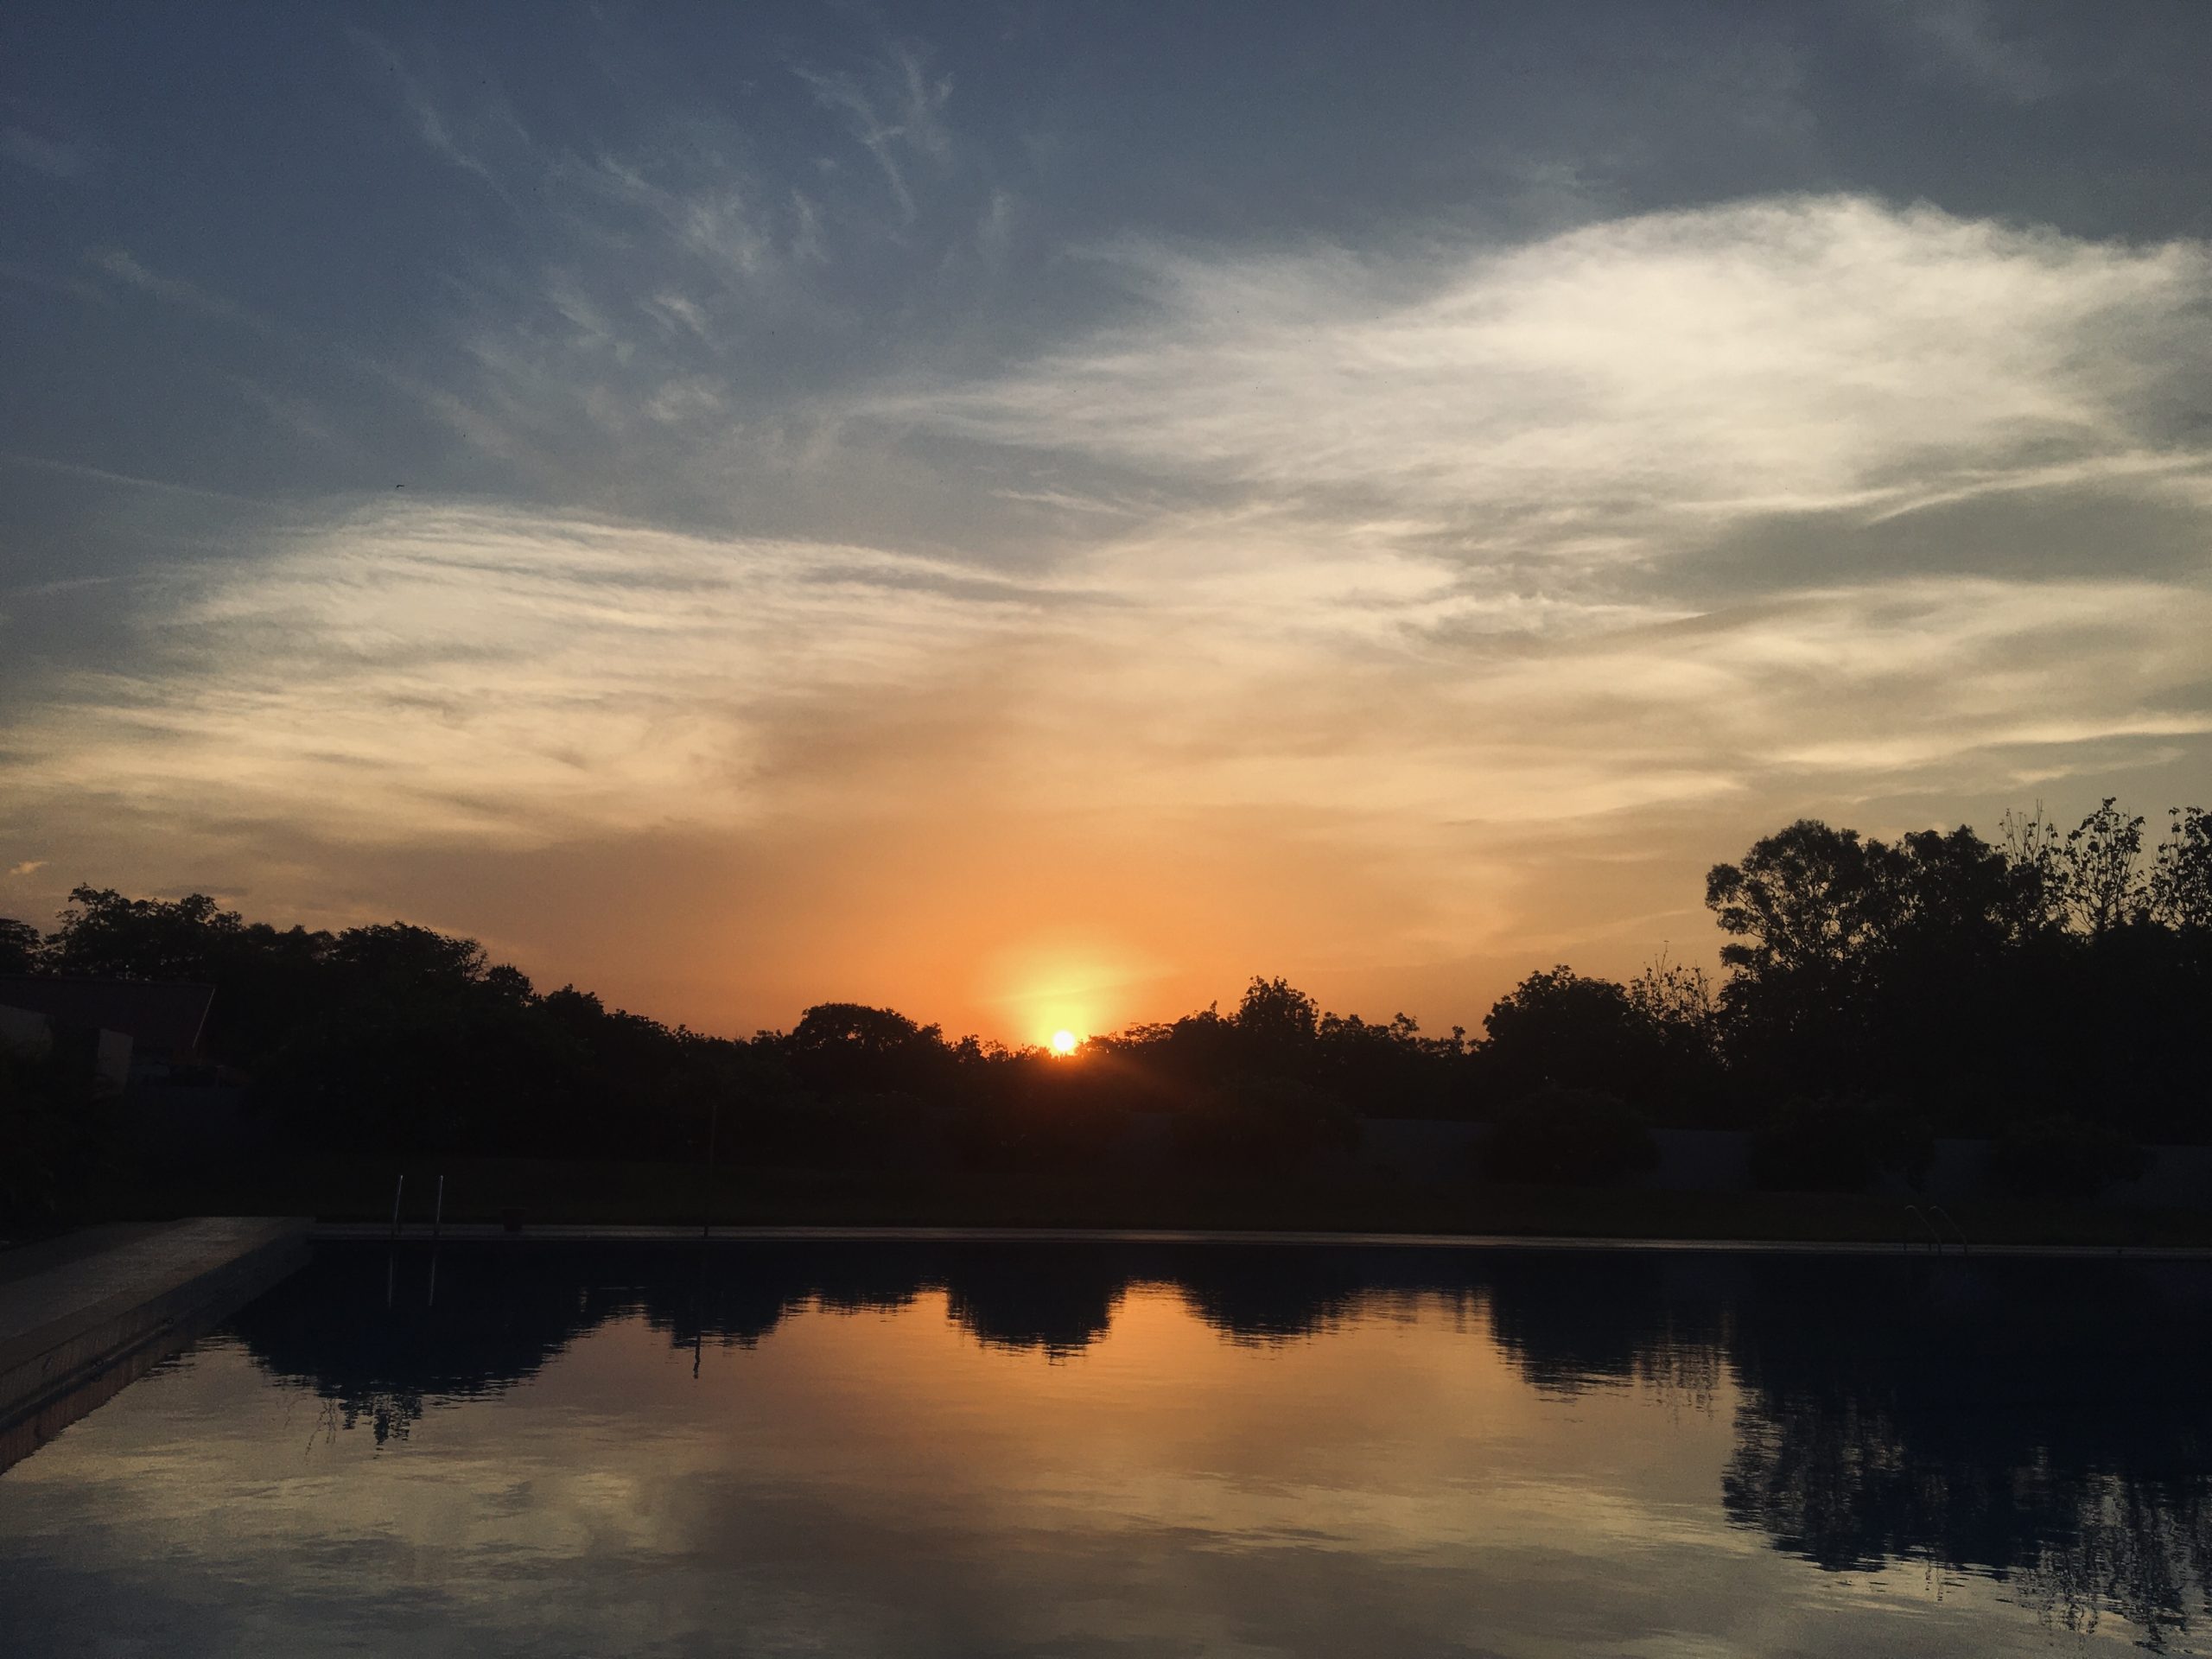 Sunset scenery in the Pool